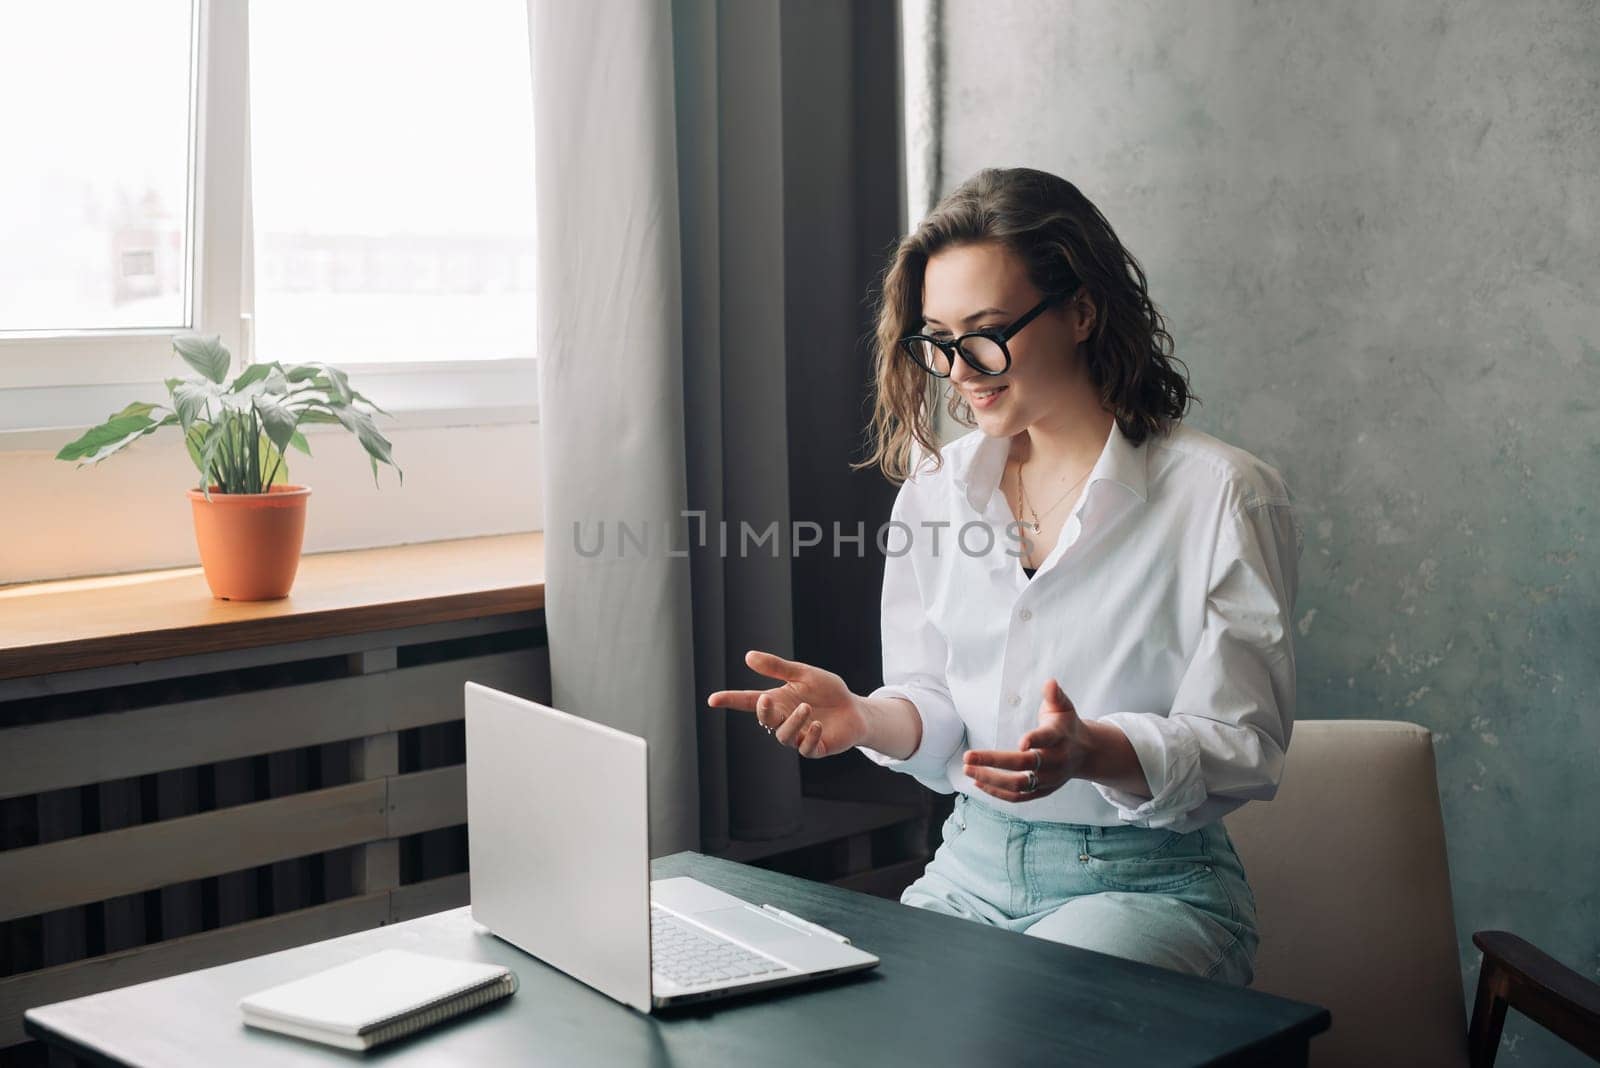 Digital Business Connection: Smiling Young Woman Leading Online Business Briefing, Embracing Remote Work as a Young Businesswoman or Freelancer Engaged in Virtual Collaboration on Laptop